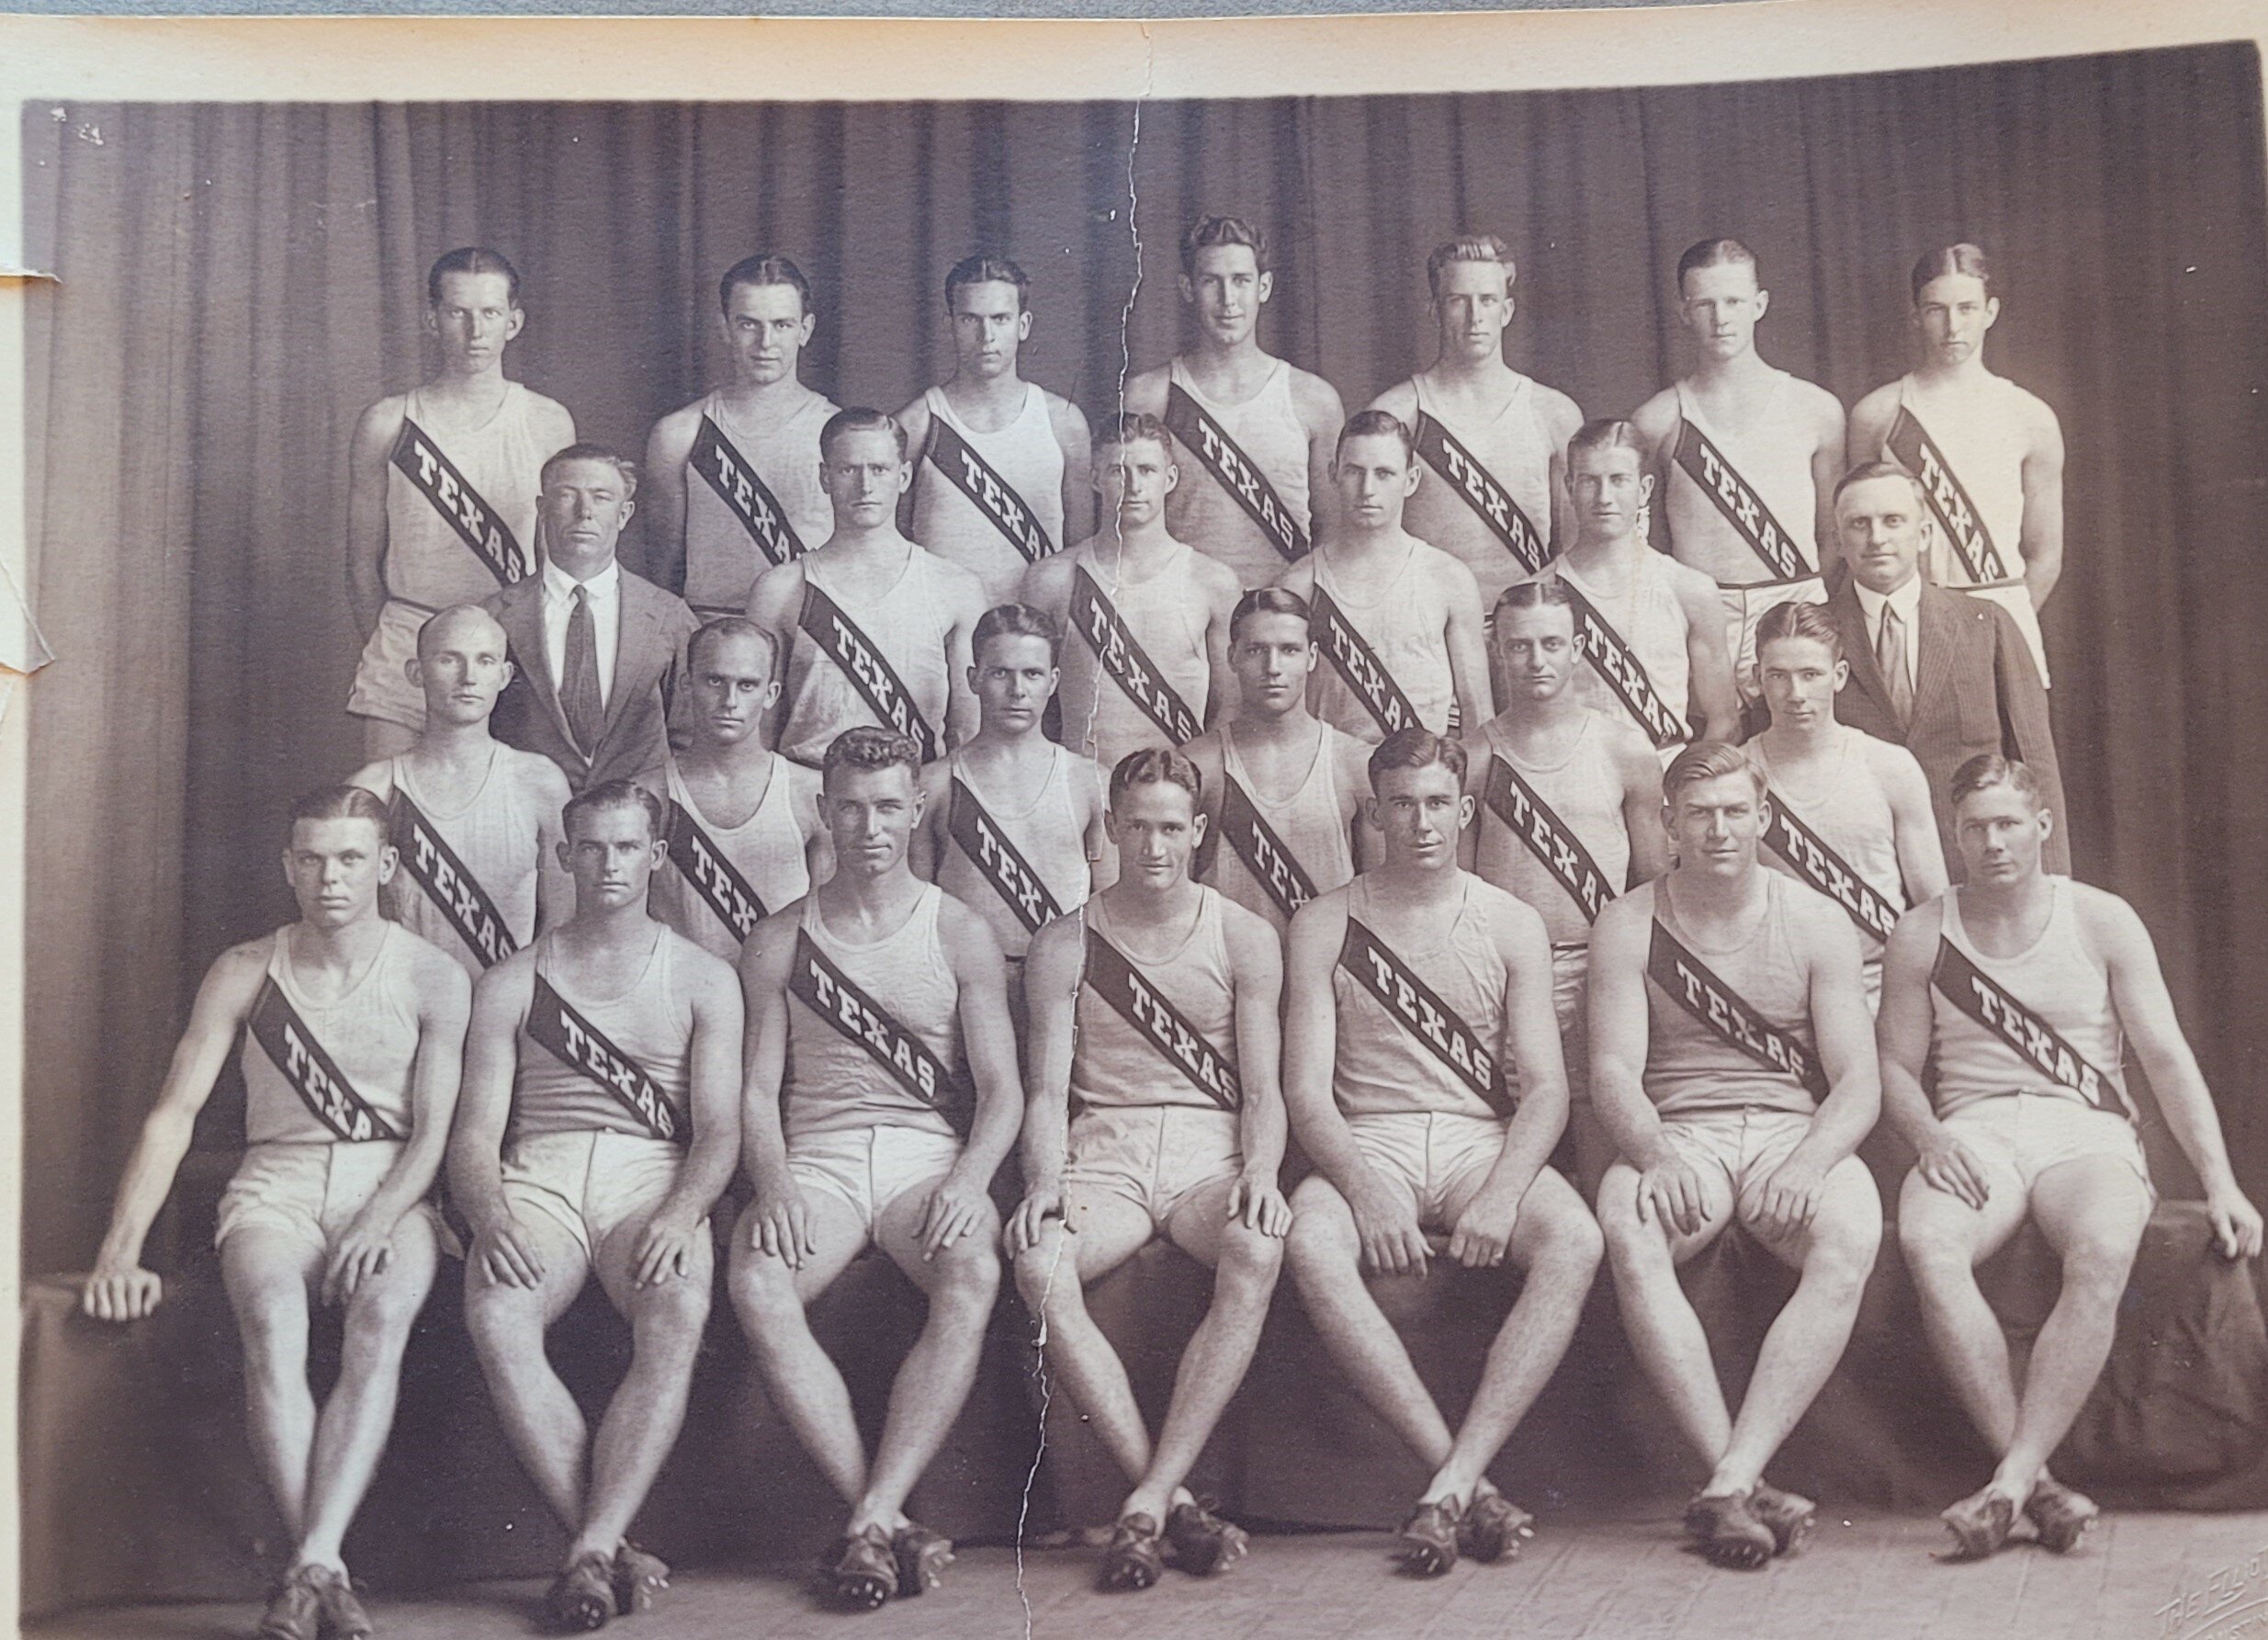 George Harris is bottom row second from the left and Reese is 4th from the left